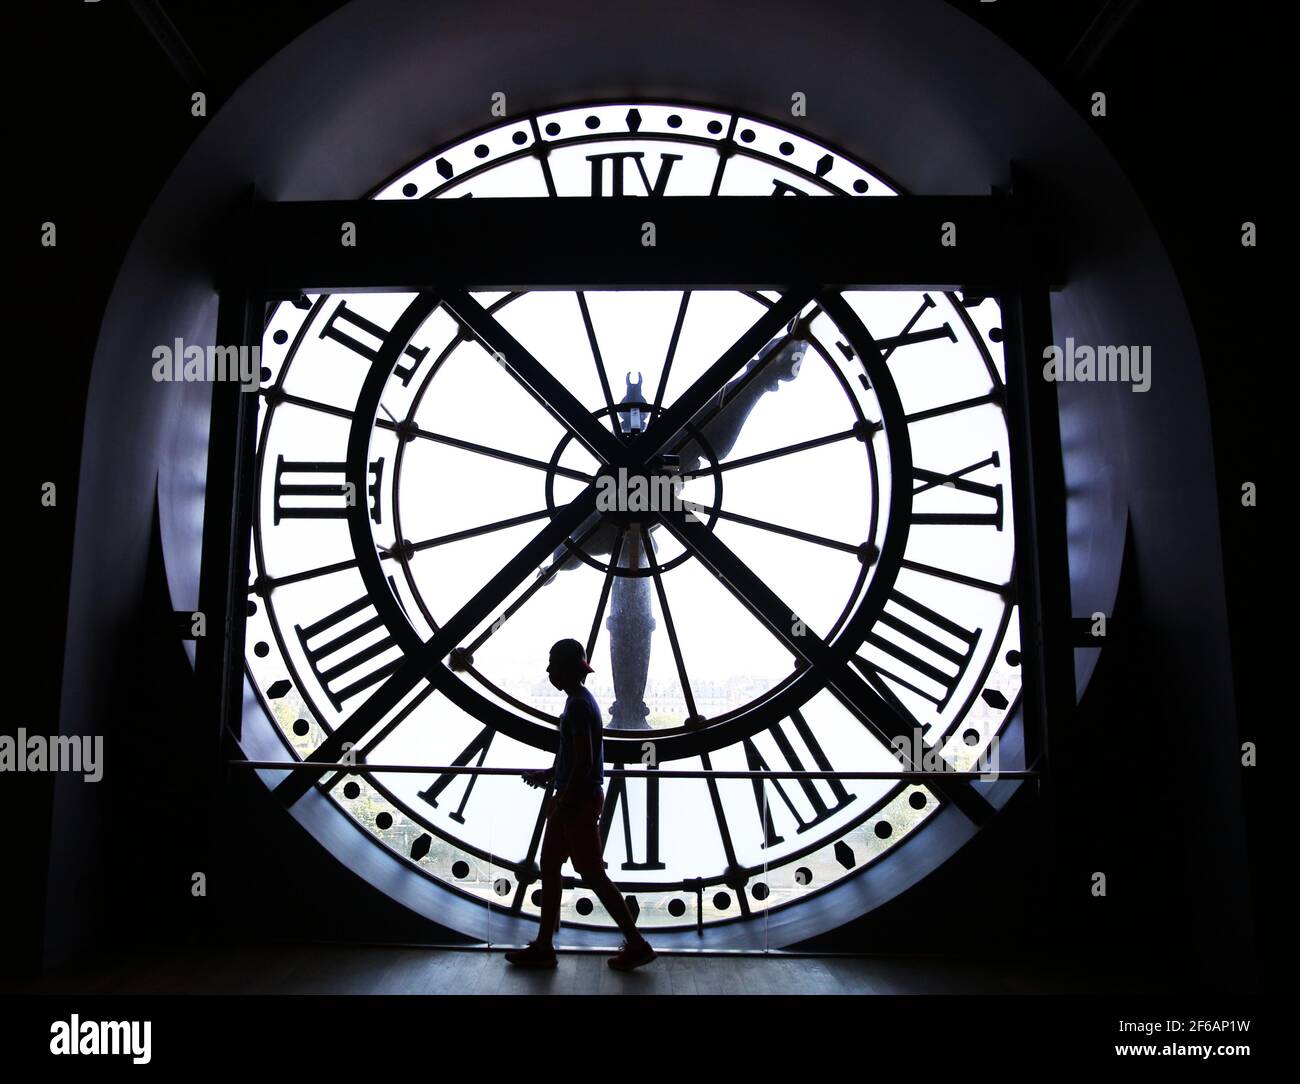 Paris, France. 23rd June, 2020. File photo taken on June 23, 2020 shows a man visiting Musee D'Orsay in Paris, France. According to the French culture minister, Musee D'Orsay will soon carry the name of former president Valery Giscard d'Estaing to honor his contributions in art and culture. The official name of the museum will now be 'Les Musees D'Orsay et de l'Orangerie Valery Giscard d'Estaing'. Credit: Gao Jing/Xinhua/Alamy Live News Stock Photo